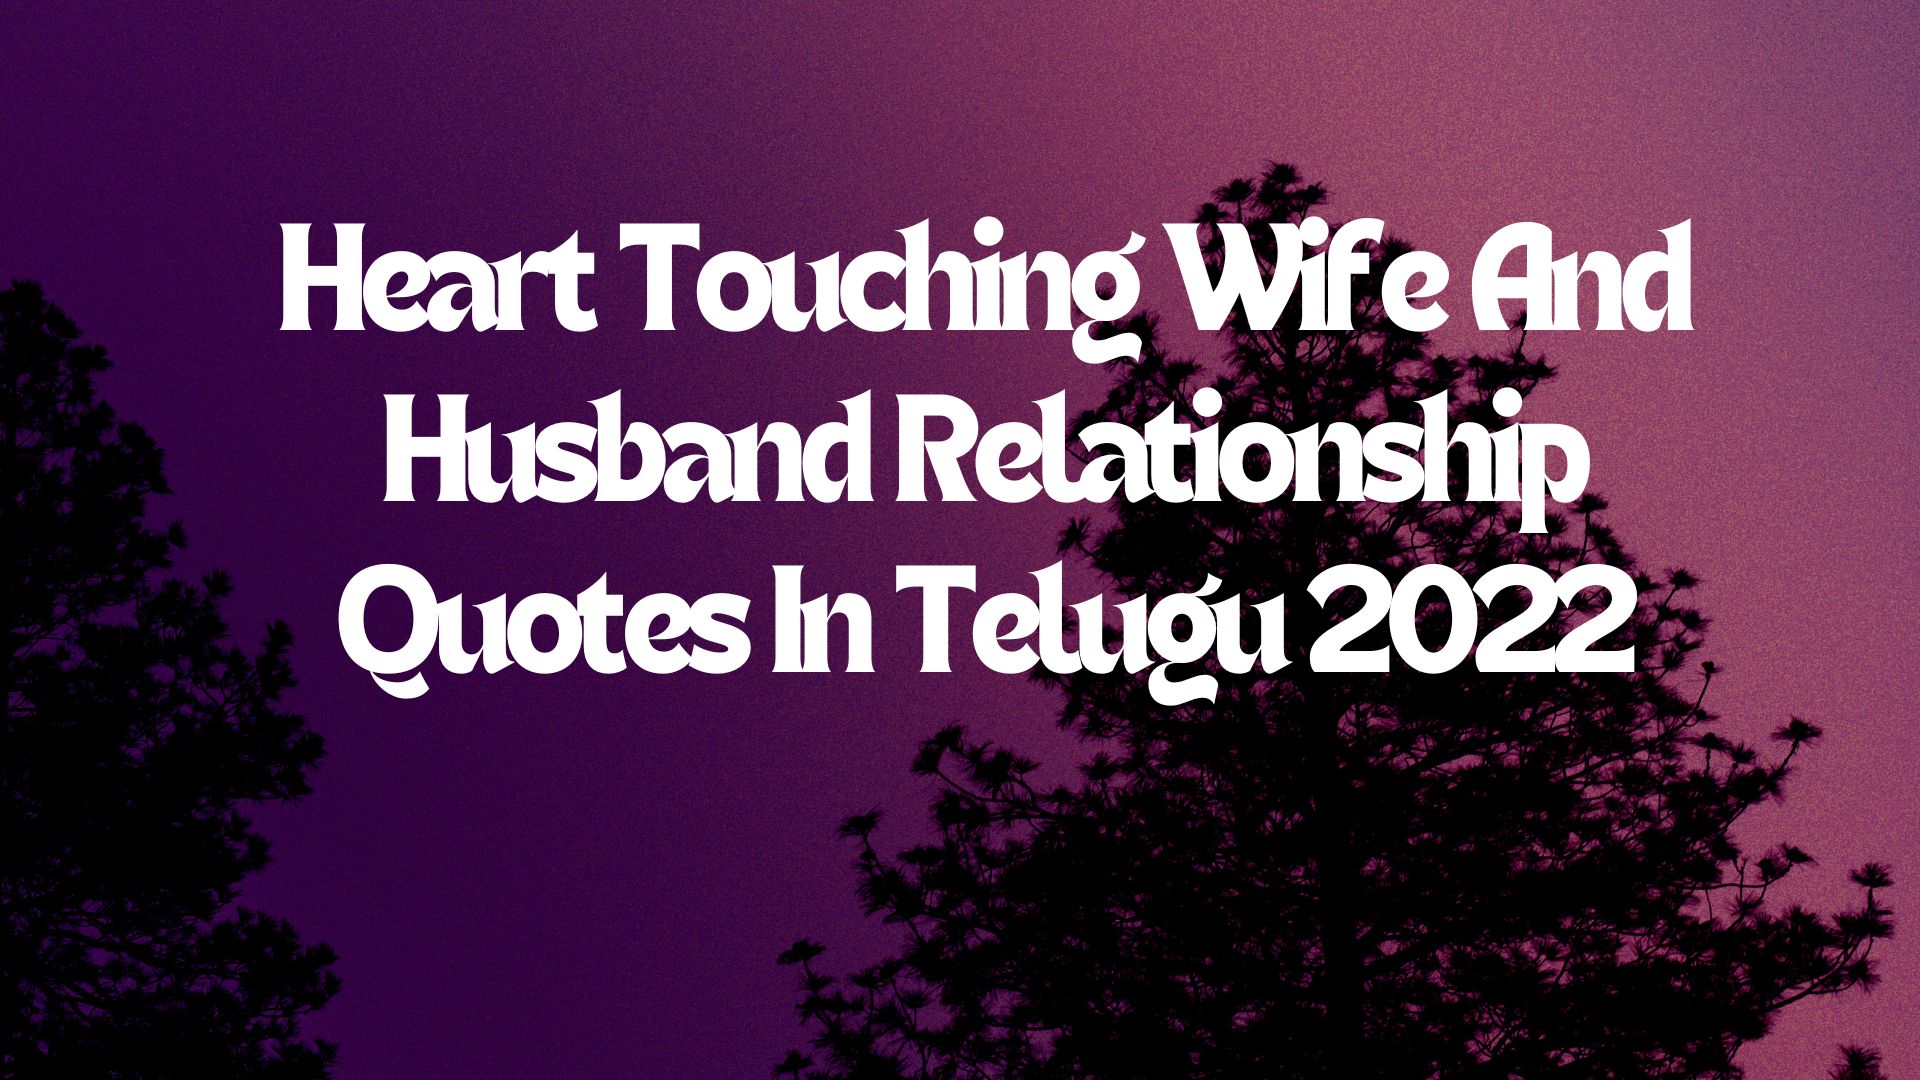 heart-touching-wife-and-husband-relationship-quotes-in-telugu